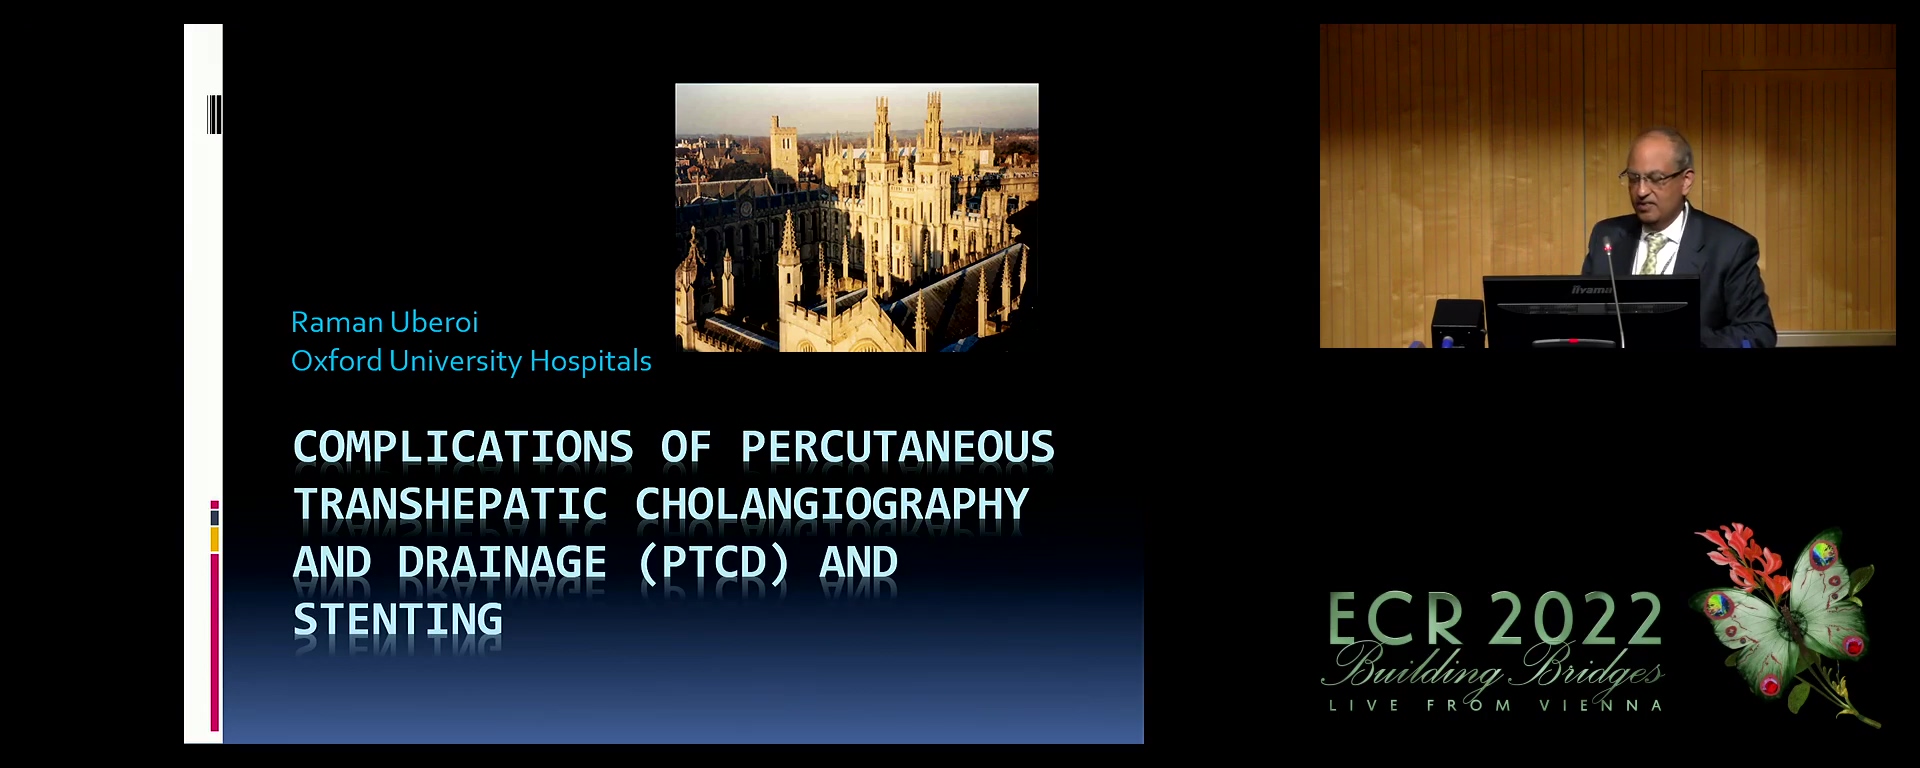 Complications of percutaneous transhepatic cholangiography and drainage (PTCD) and stenting